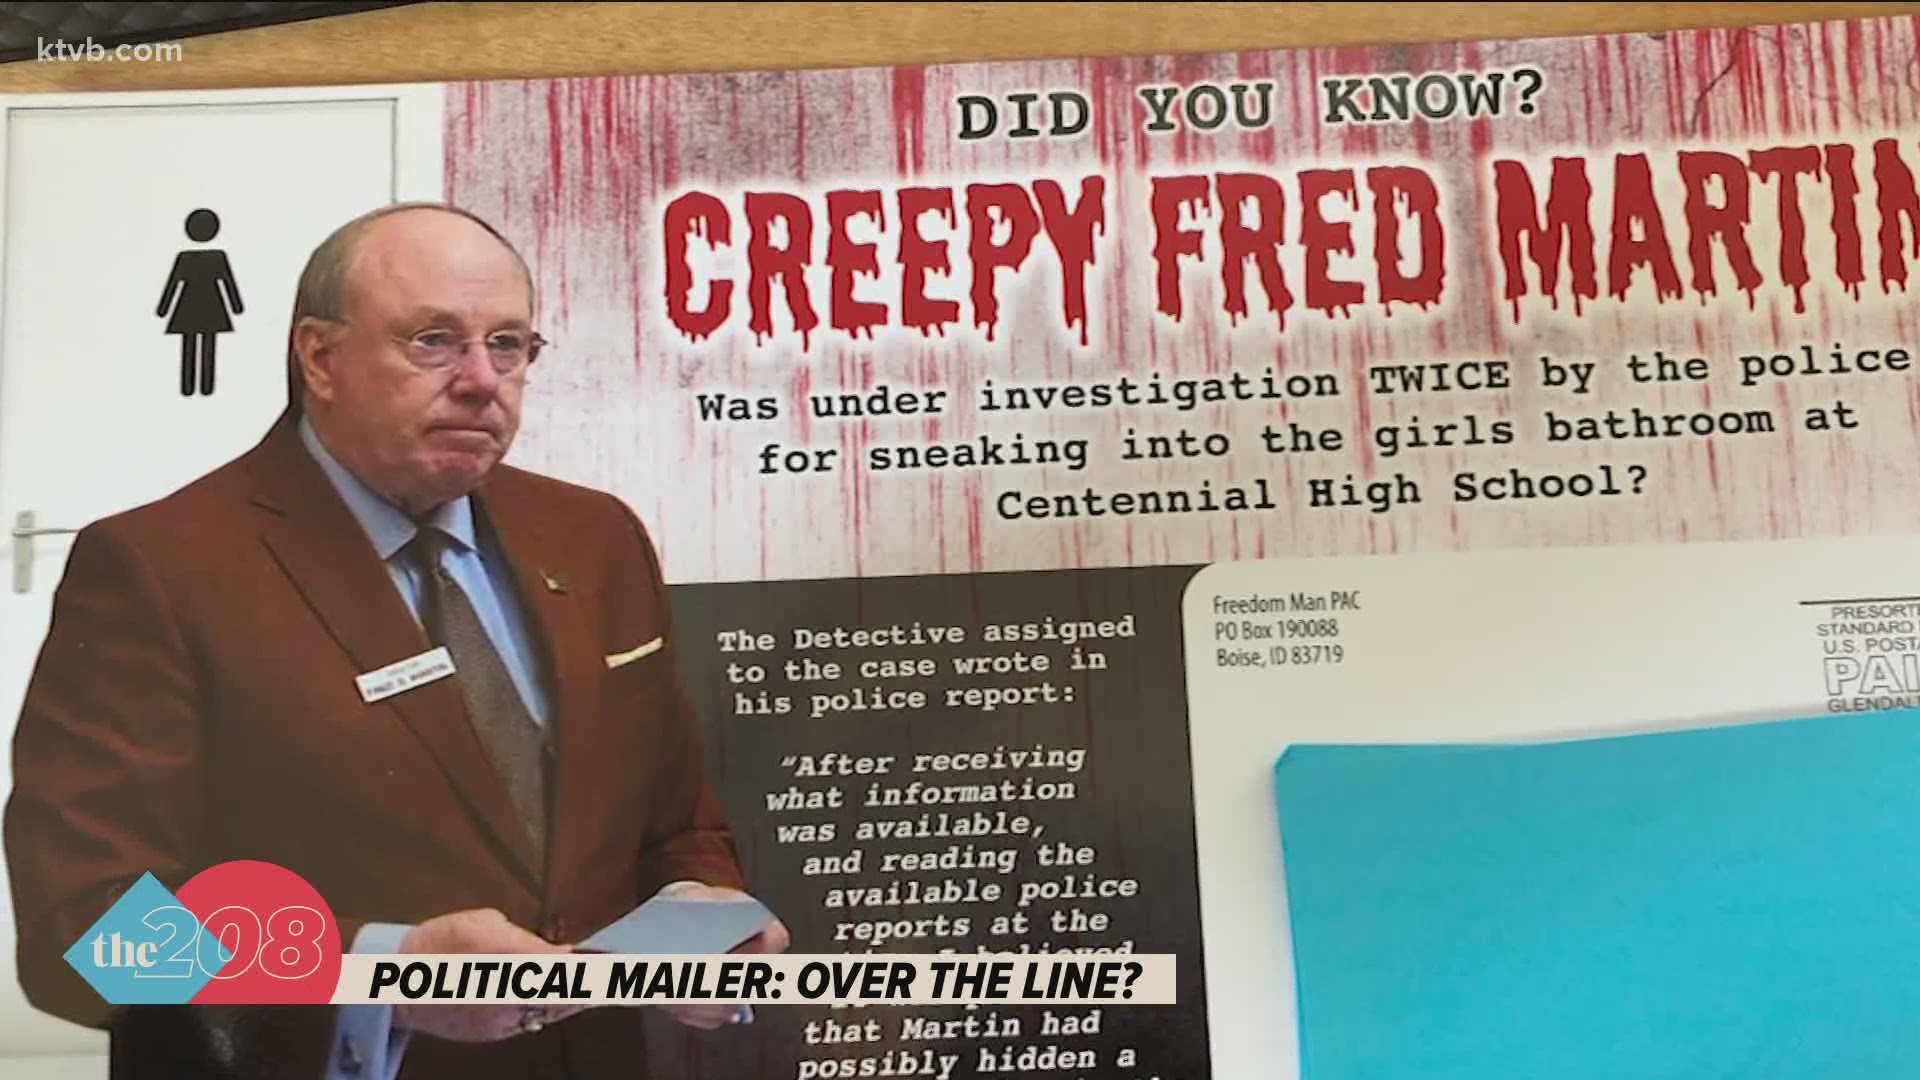 The mailer, sent by The Freedom Man PAC, labels Martin as creepy and includes excerpts from two Boise Police reports involving Martin.